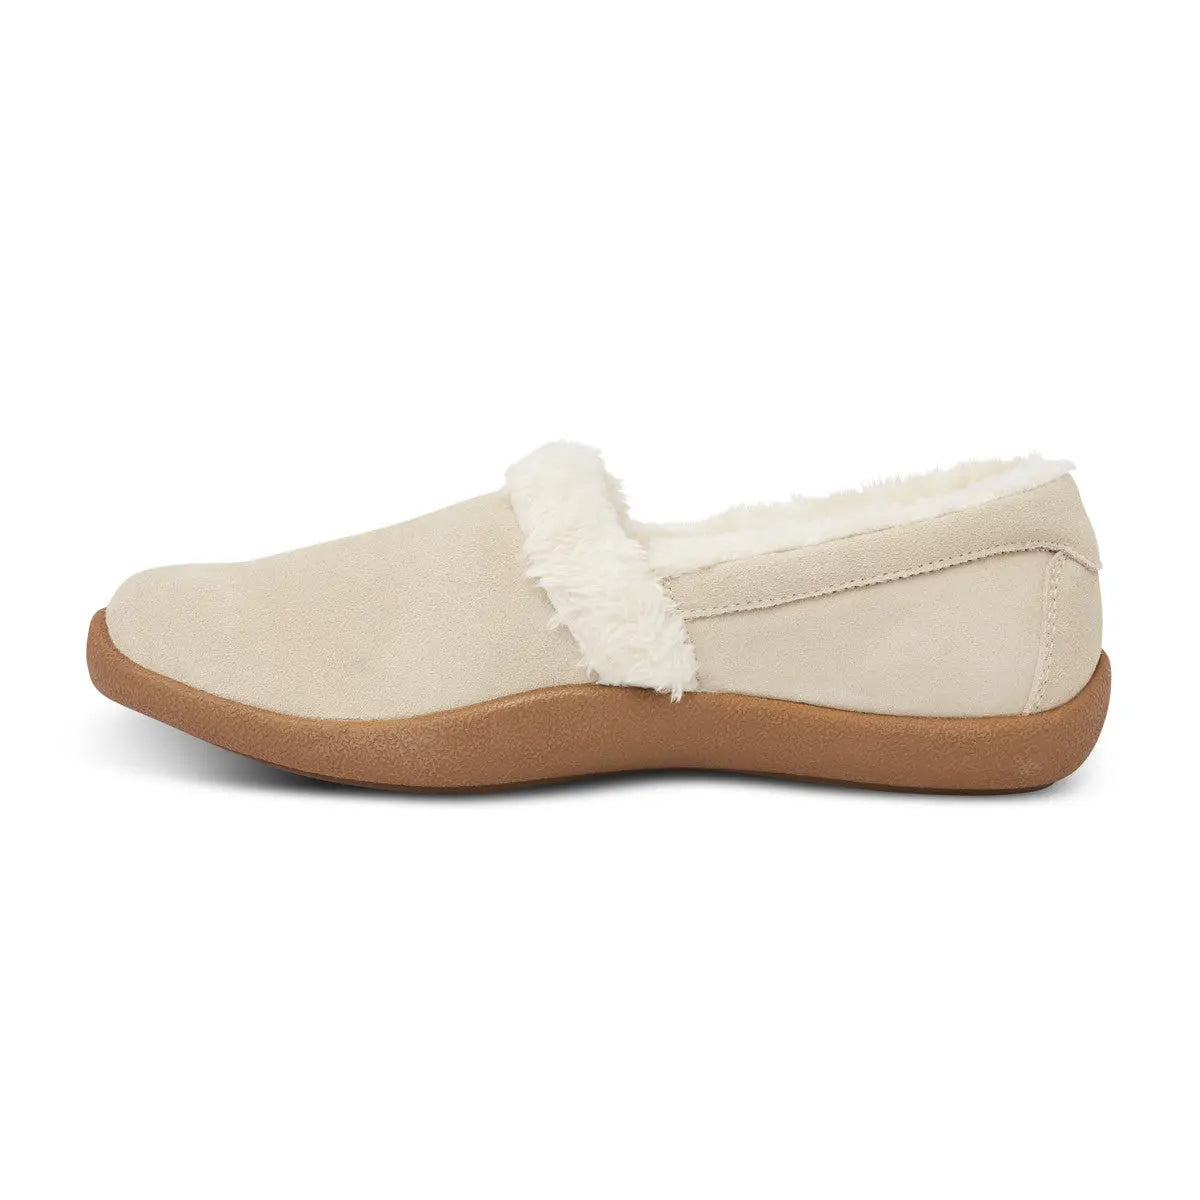 Anodyne Women's No.21 Smooth Toe, Sand - Left Side View